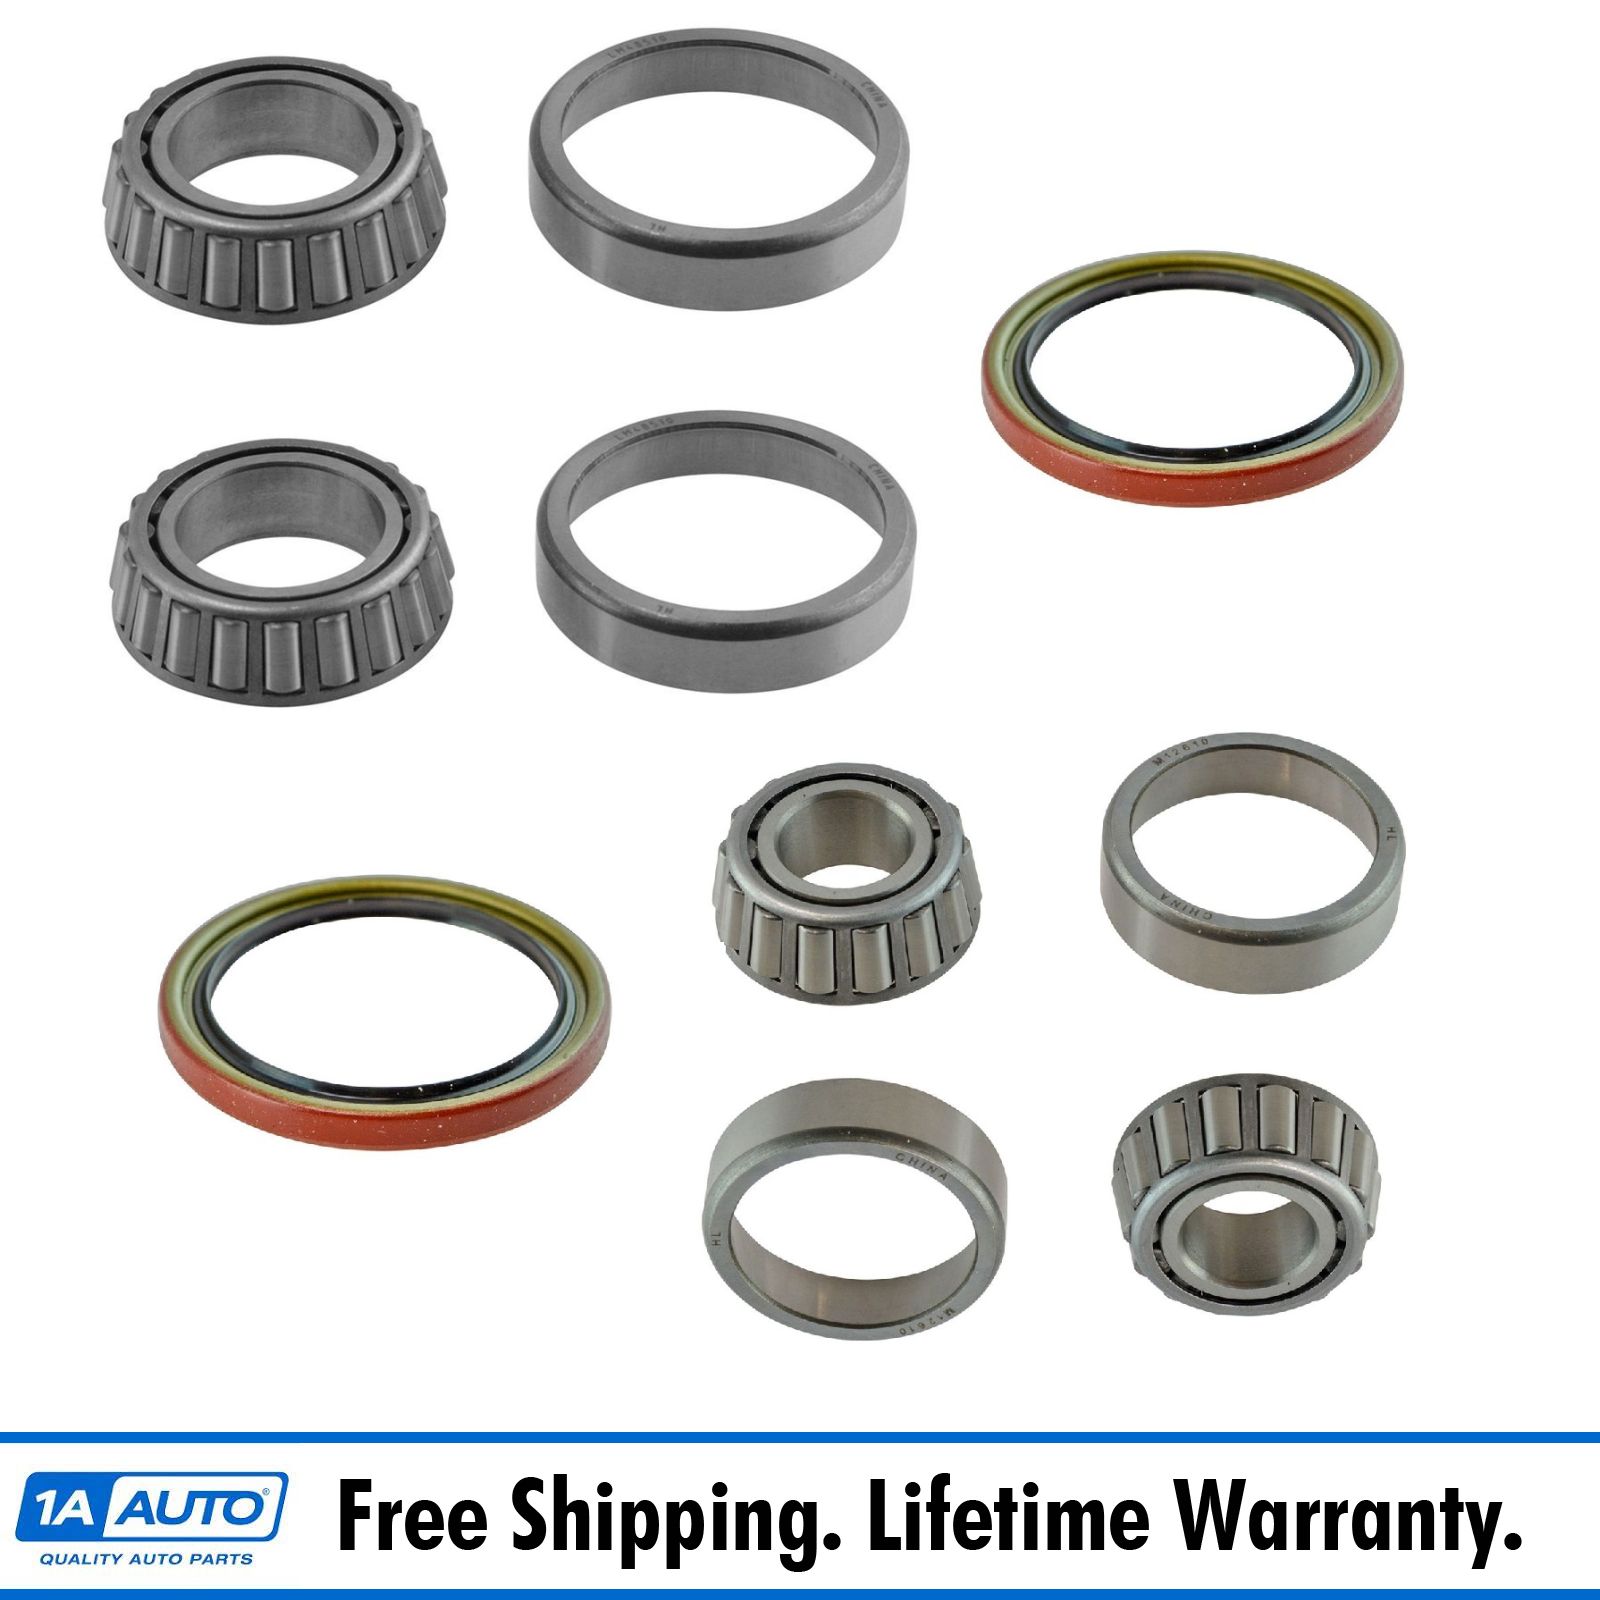 Front Inner Outer Wheel Bearing /& Seal 6 Piece Kit for Chevy S10 Regal El Camino